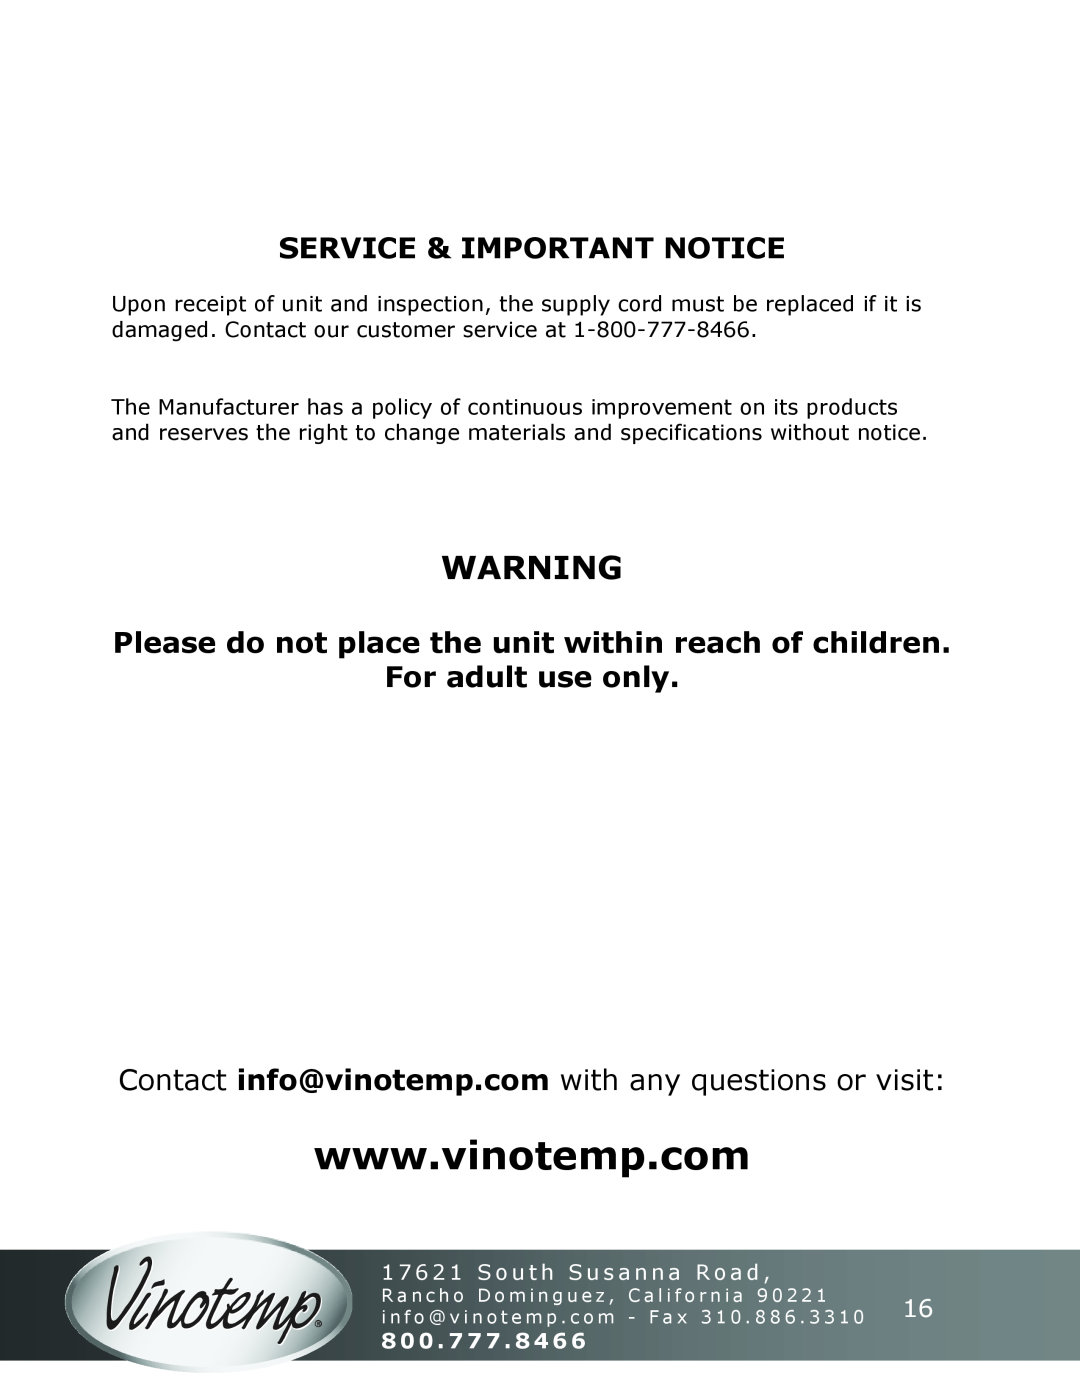 Vinotemp VT-50SBW Service & Important Notice, For adult use only, 1 7 6 2 1 S o u t h S u s a n n a R o a d, 800 